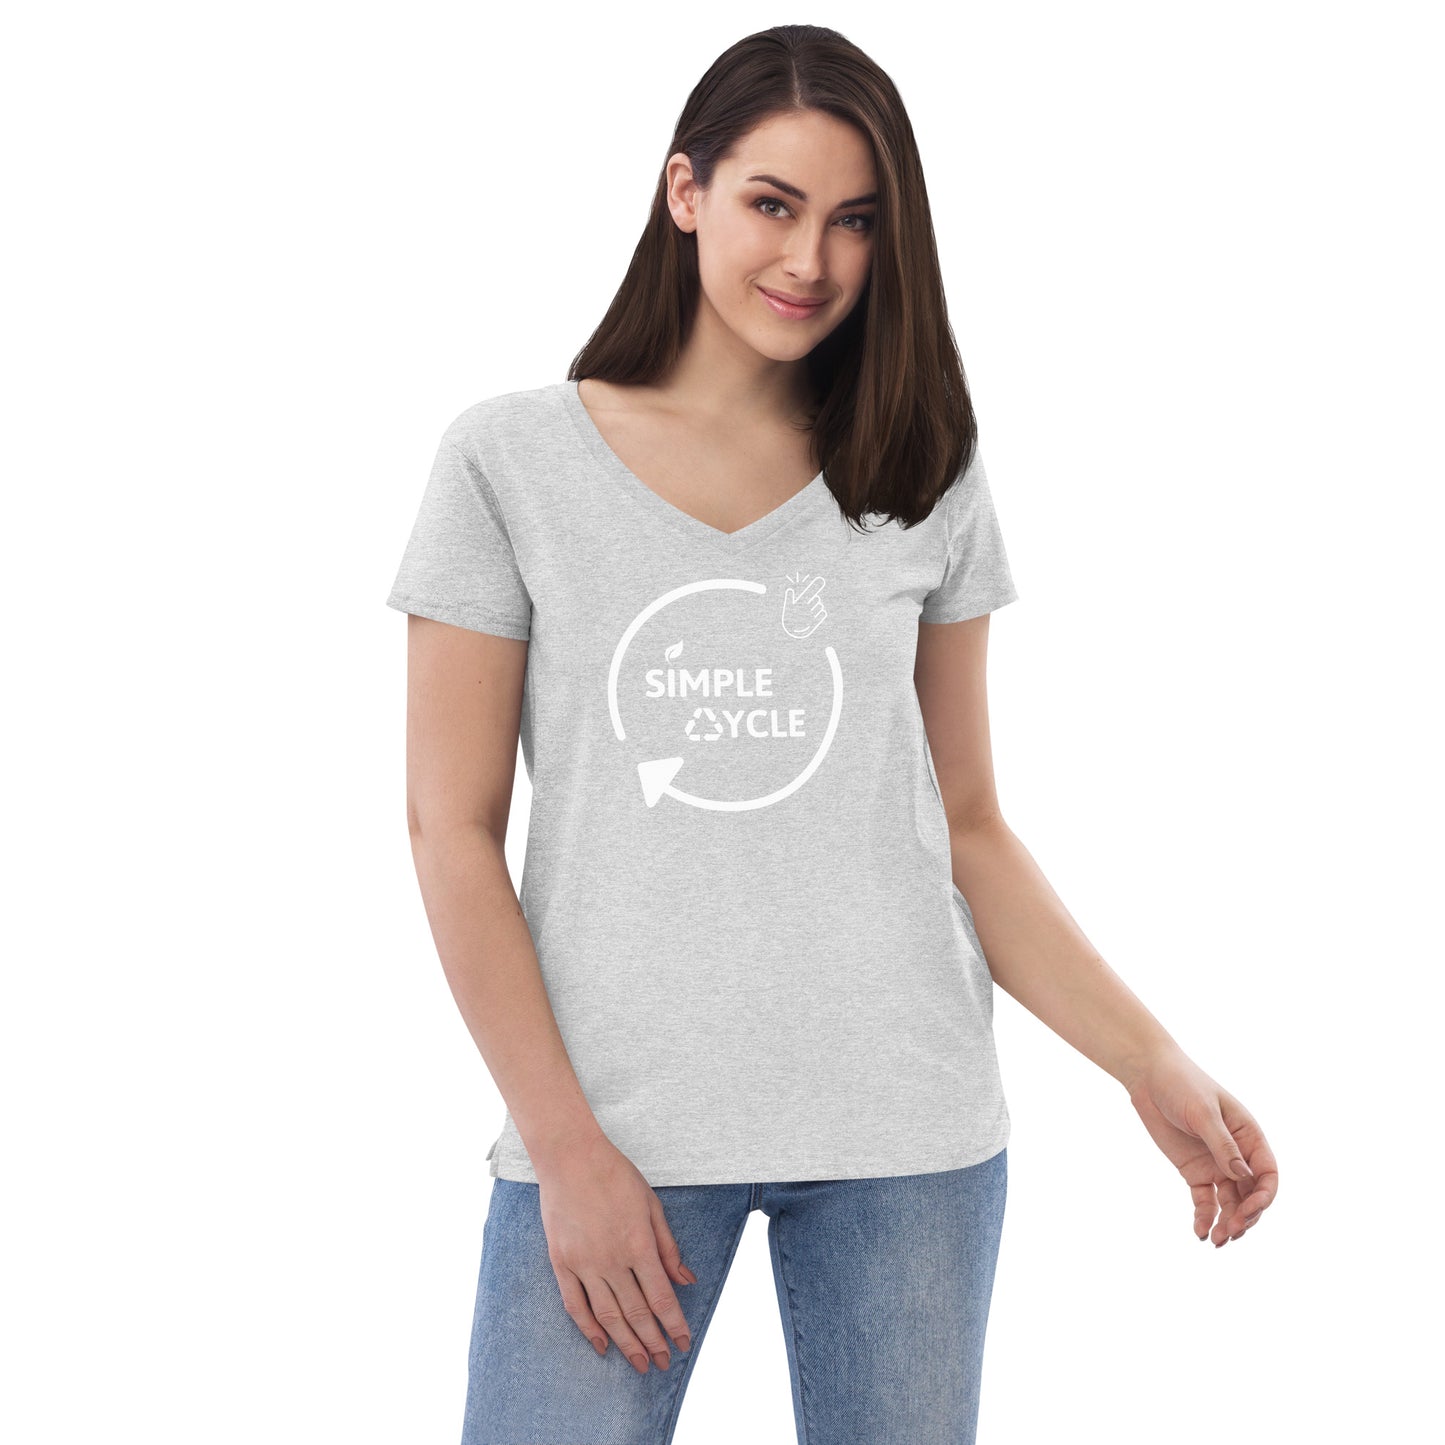 SimpleCycle Women’s Recycled V-Neck T-Shirt heather grey front